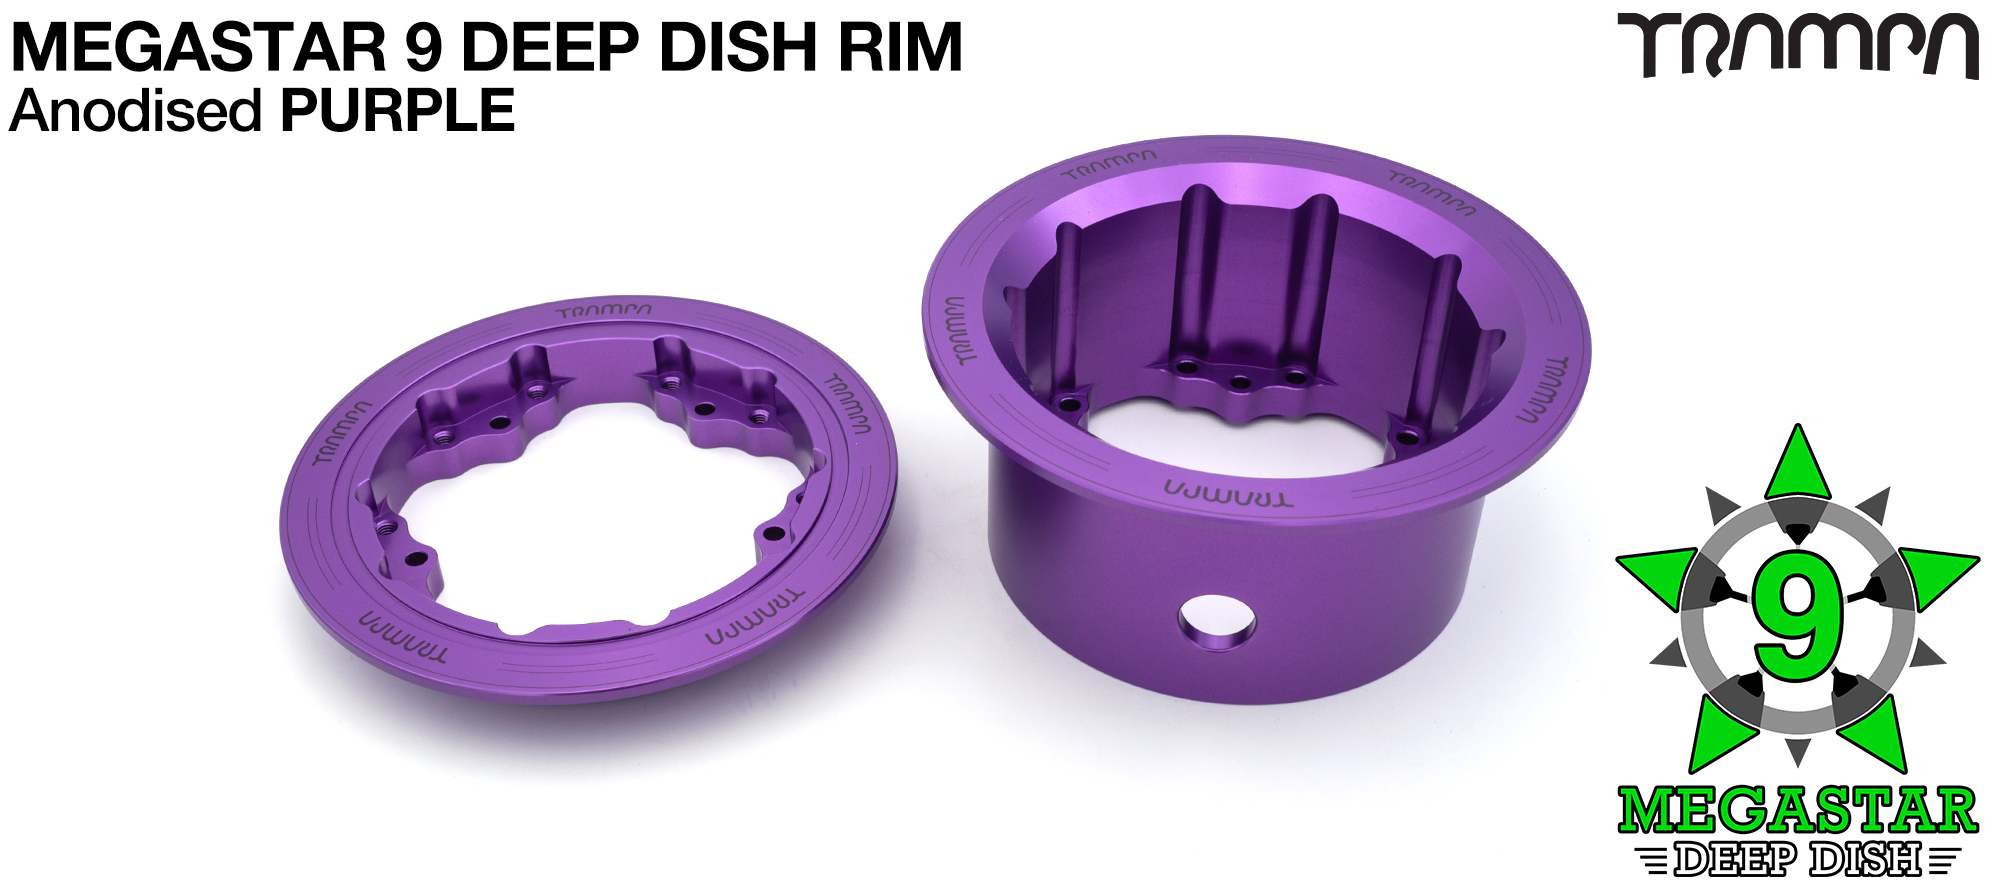 MEGASTAR 9 DEEP-DISH Rims Measure 3.75/4x 3 Inch. The Bearings are positioned OFF-SET & accept 4 Inch Rim Tyres to make 9 or 10 inch Wheels - PURPLE